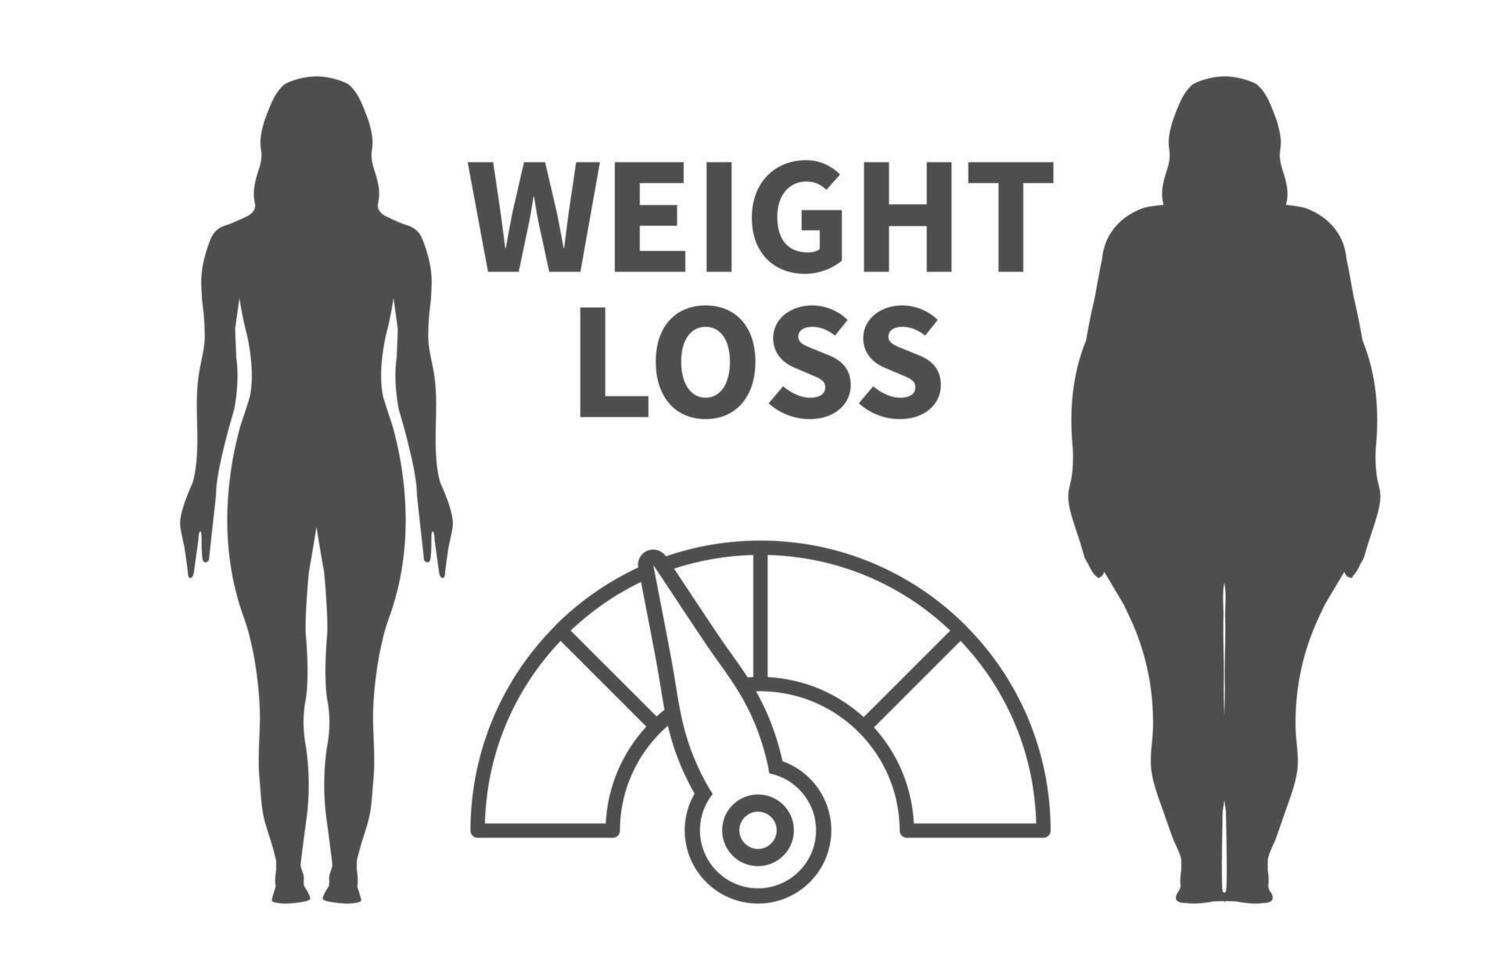 Weight Loss Infographic Illustration with Woman Silhouette vector